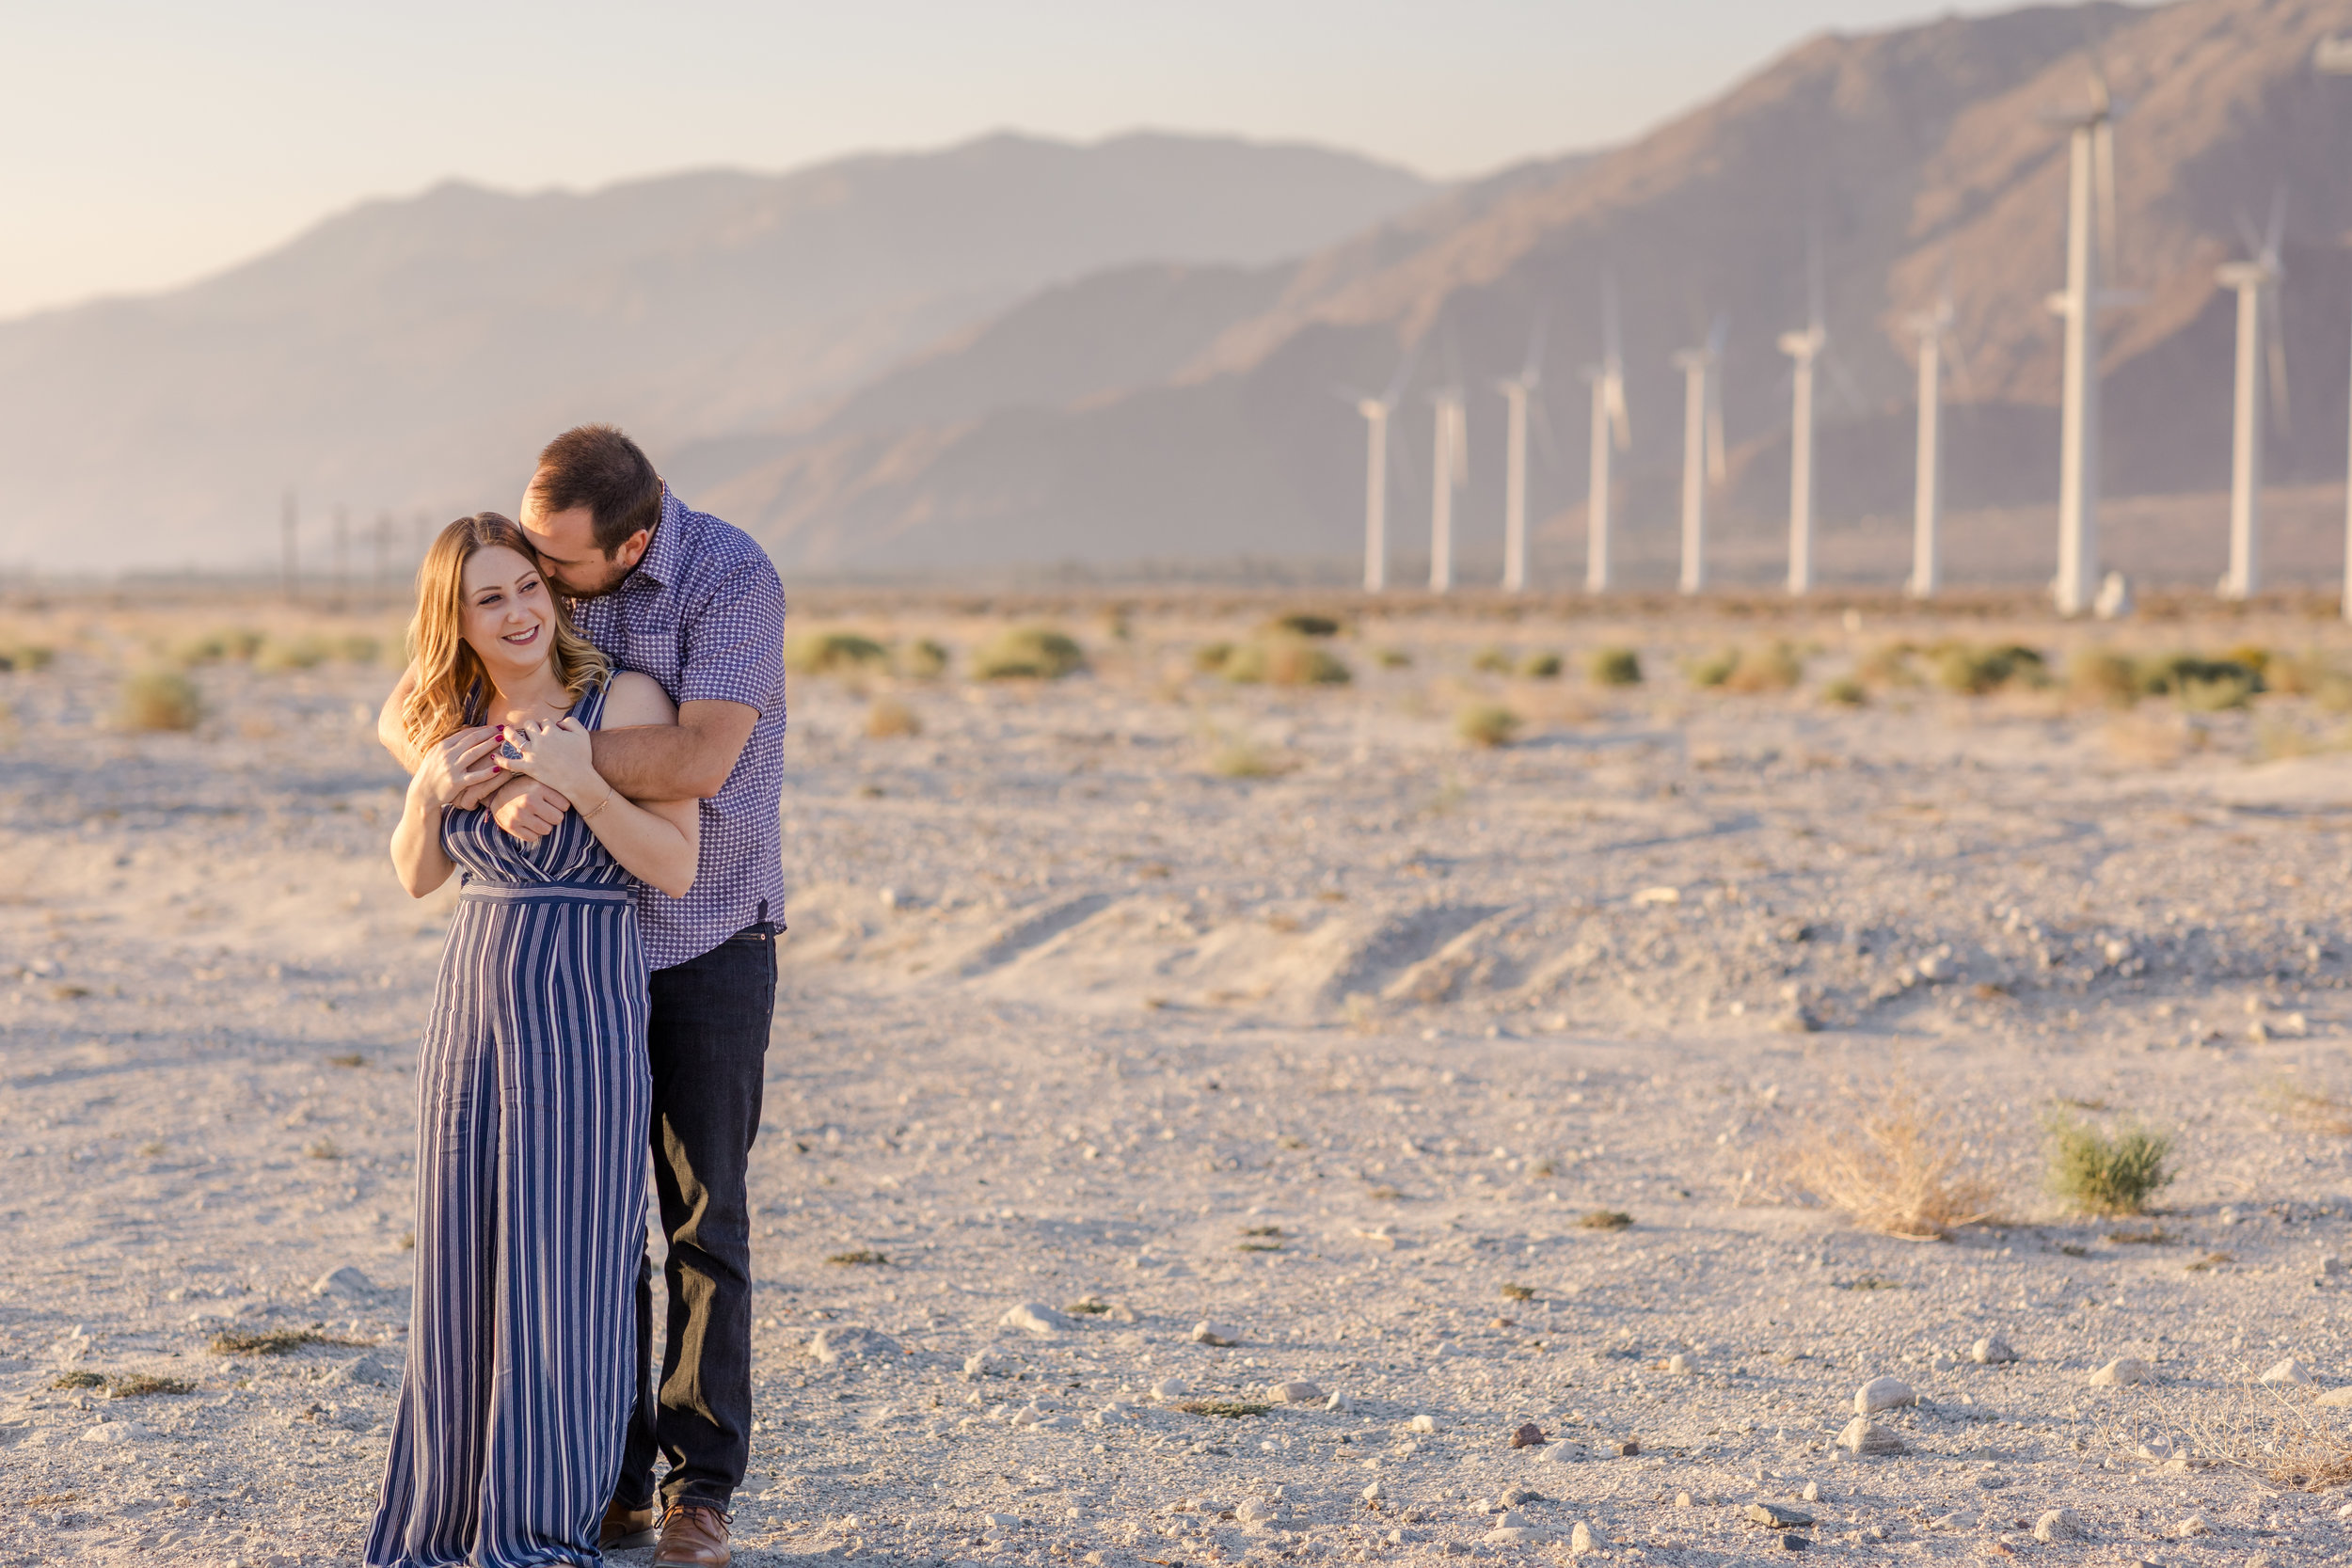 Check out this beautiful palm springs engagement session photographed in California by the talented Brogan Marie Photography.